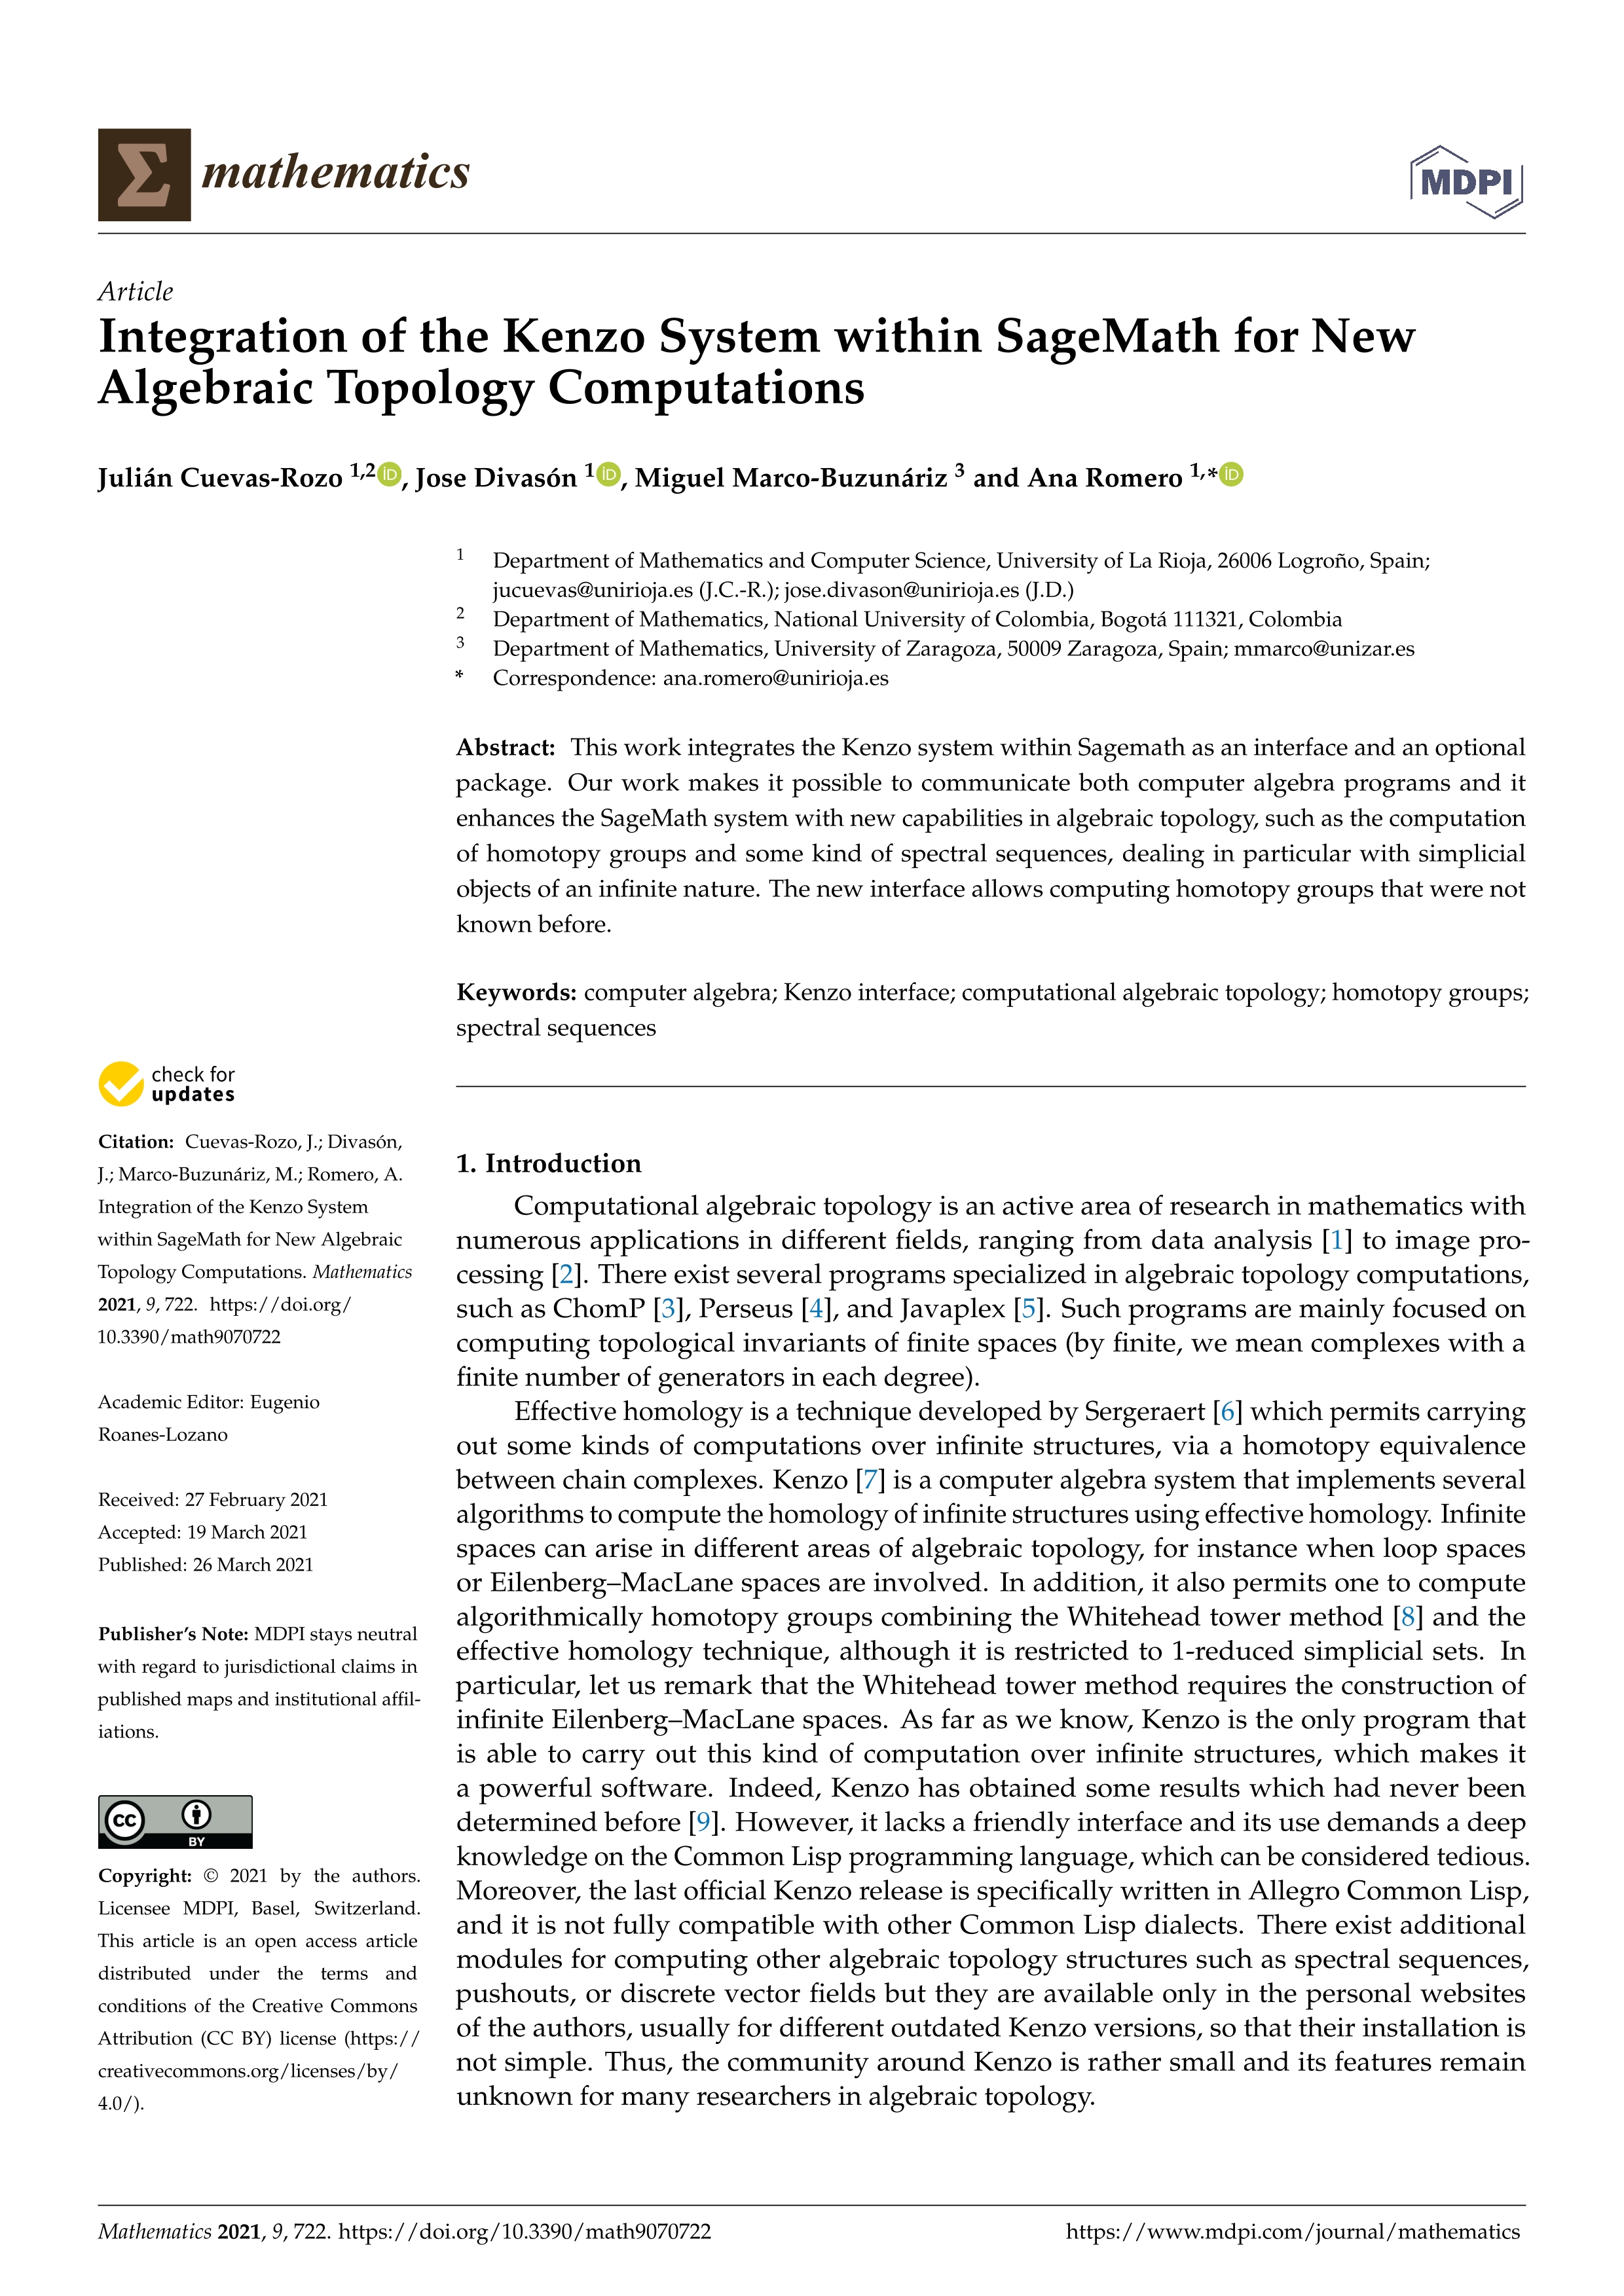 Integration of the kenzo system within sagemath for new algebraic topology computations